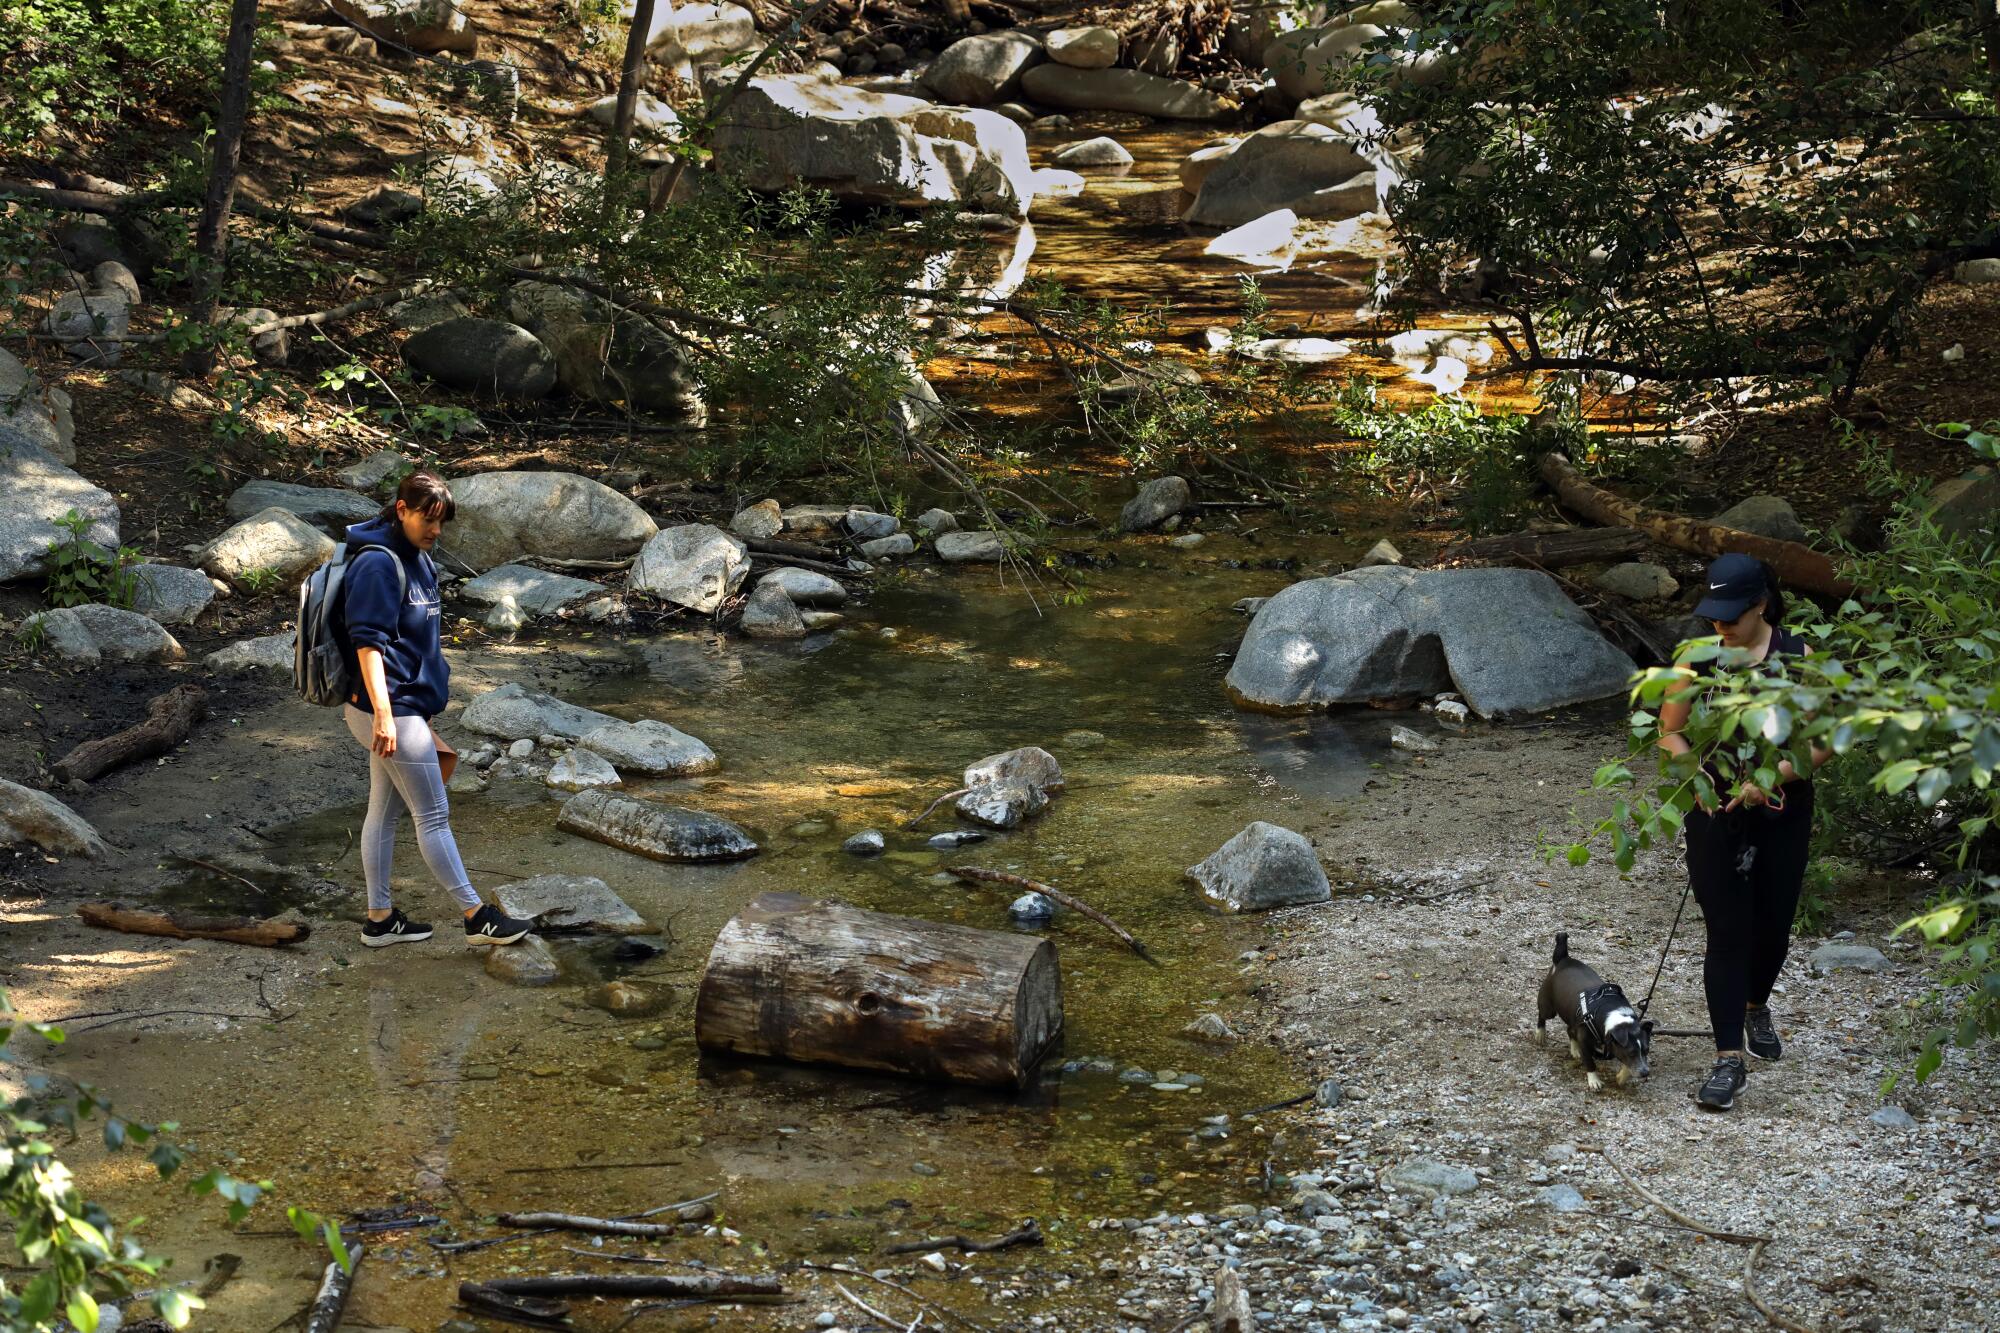 The extremely low water level of the Arroyo Seco will make survival for any fish difficult.